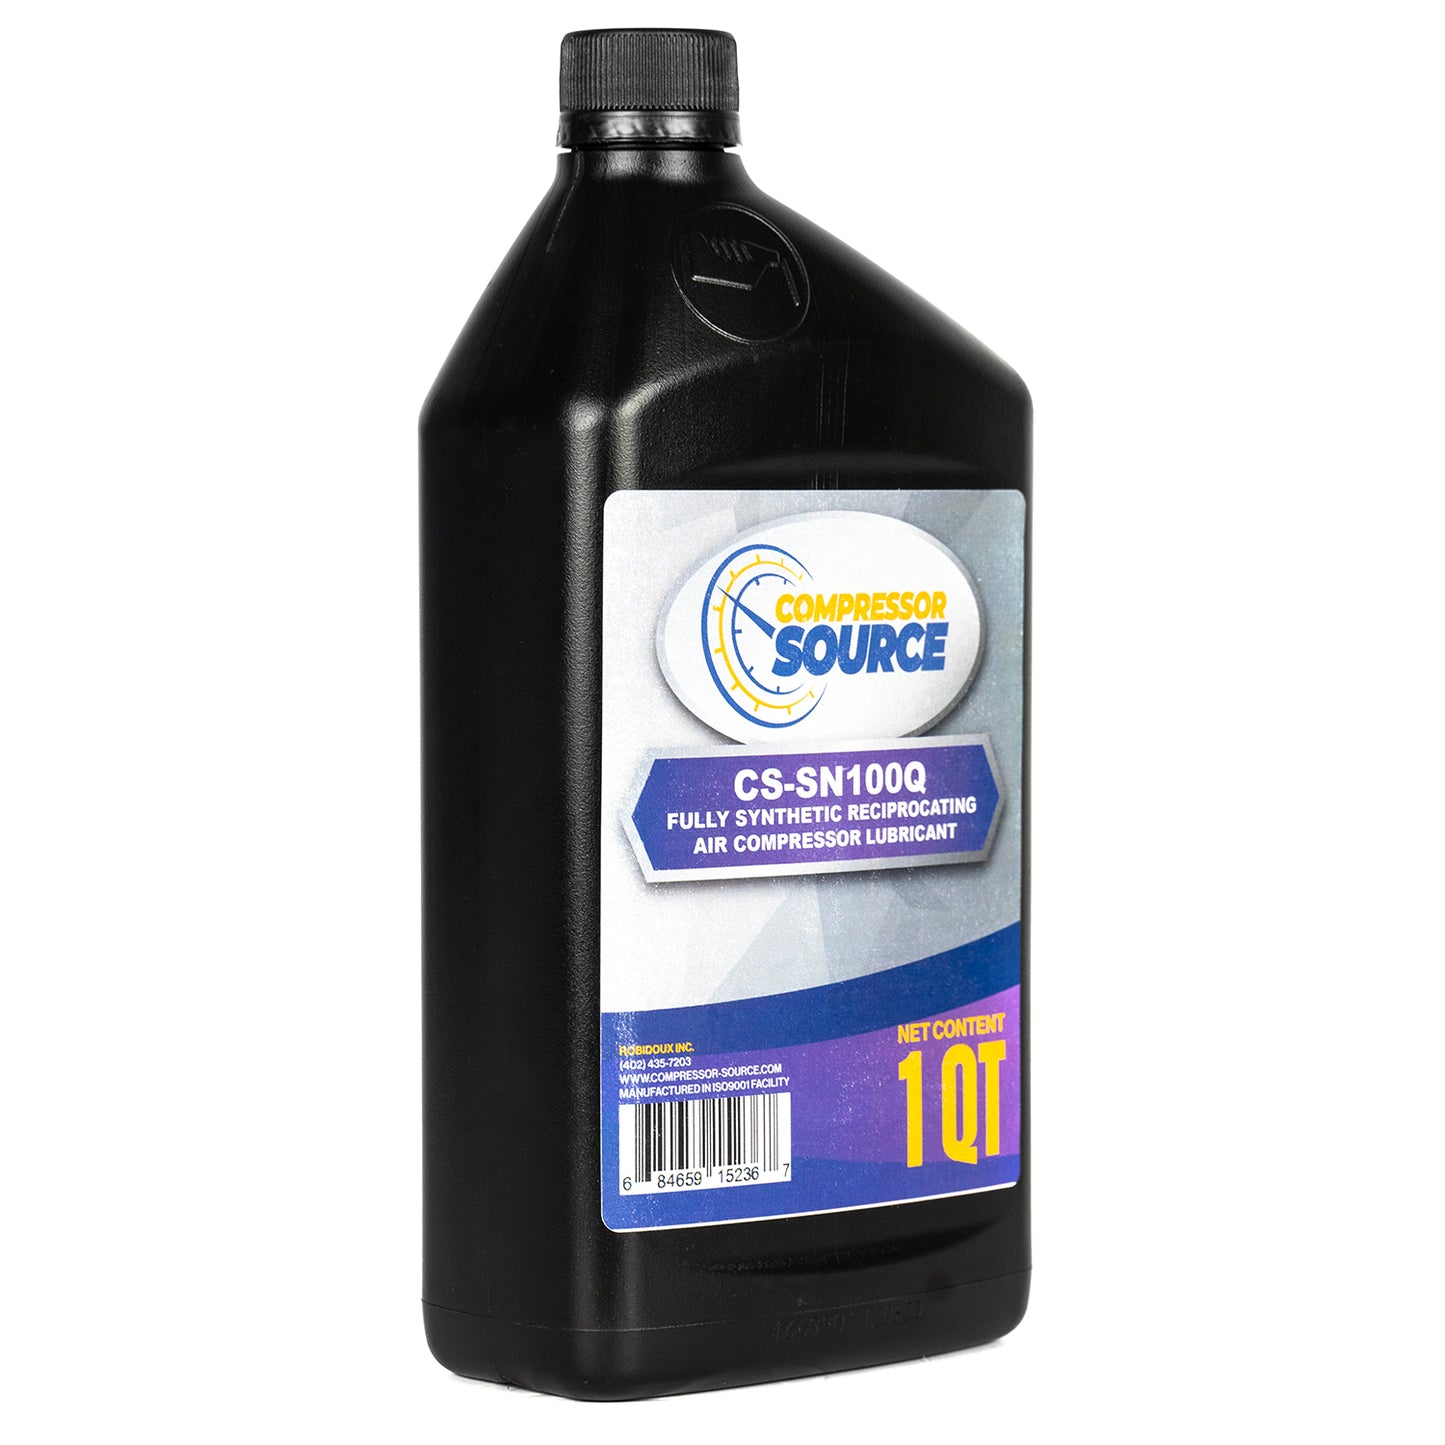 Fully Synthetic Air Compressor Oil Lubricant ISO 100 1 Quart 8000 Hour Lifespan